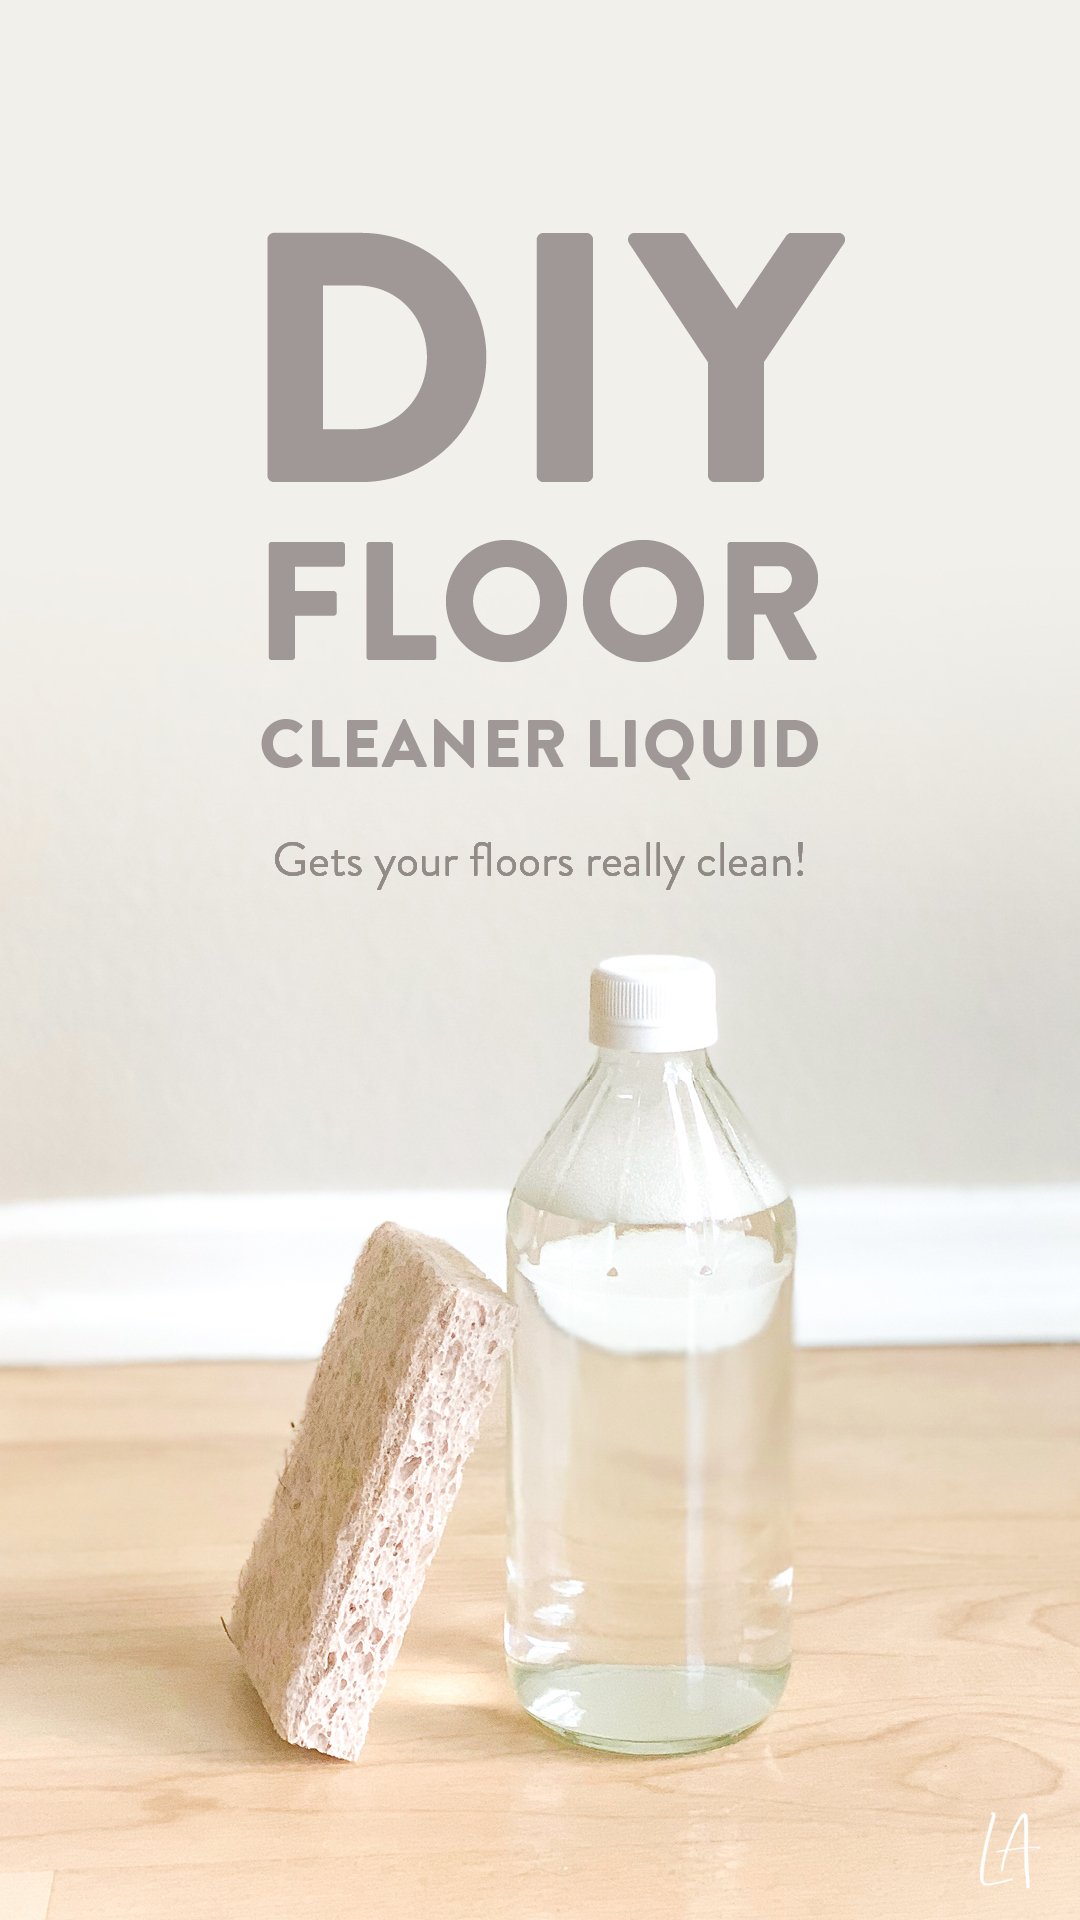 How to get your floors really clean